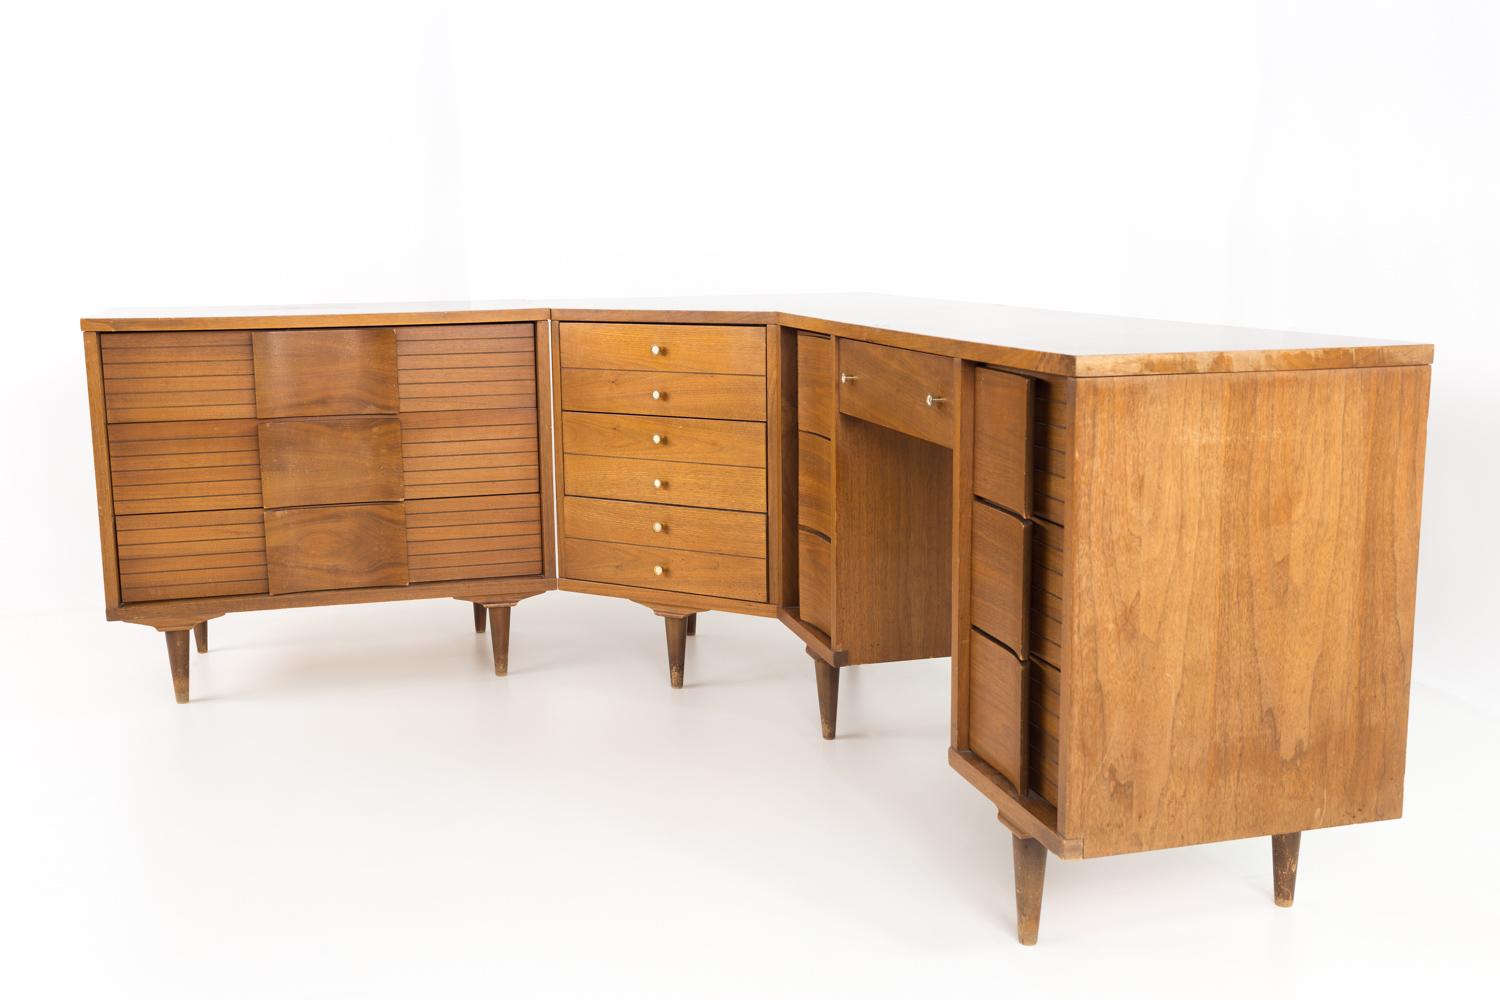 Johnson Carper mid century walnut and formica 4 piece corner dresser desk
Desk measures: 52 wide x 17.75 deep x 31.25 high

All pieces of furniture can be had in what we call restored vintage condition. That means the piece is restored upon